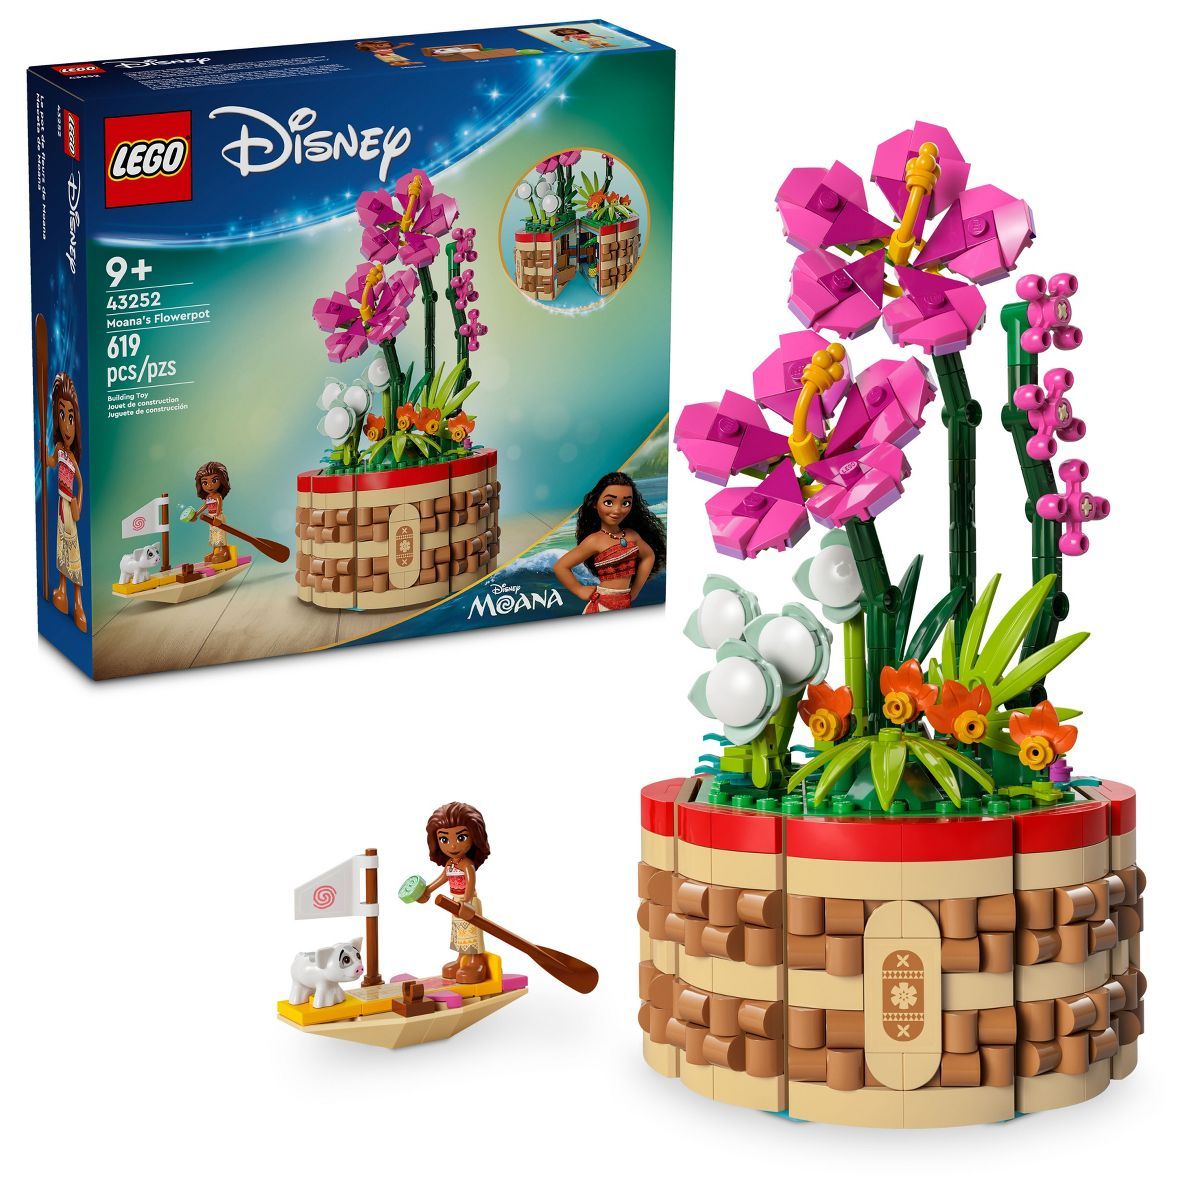 LEGO Disney Moana's Flowerpot Buildable Flower Toy and Mini Doll 43252 | Target